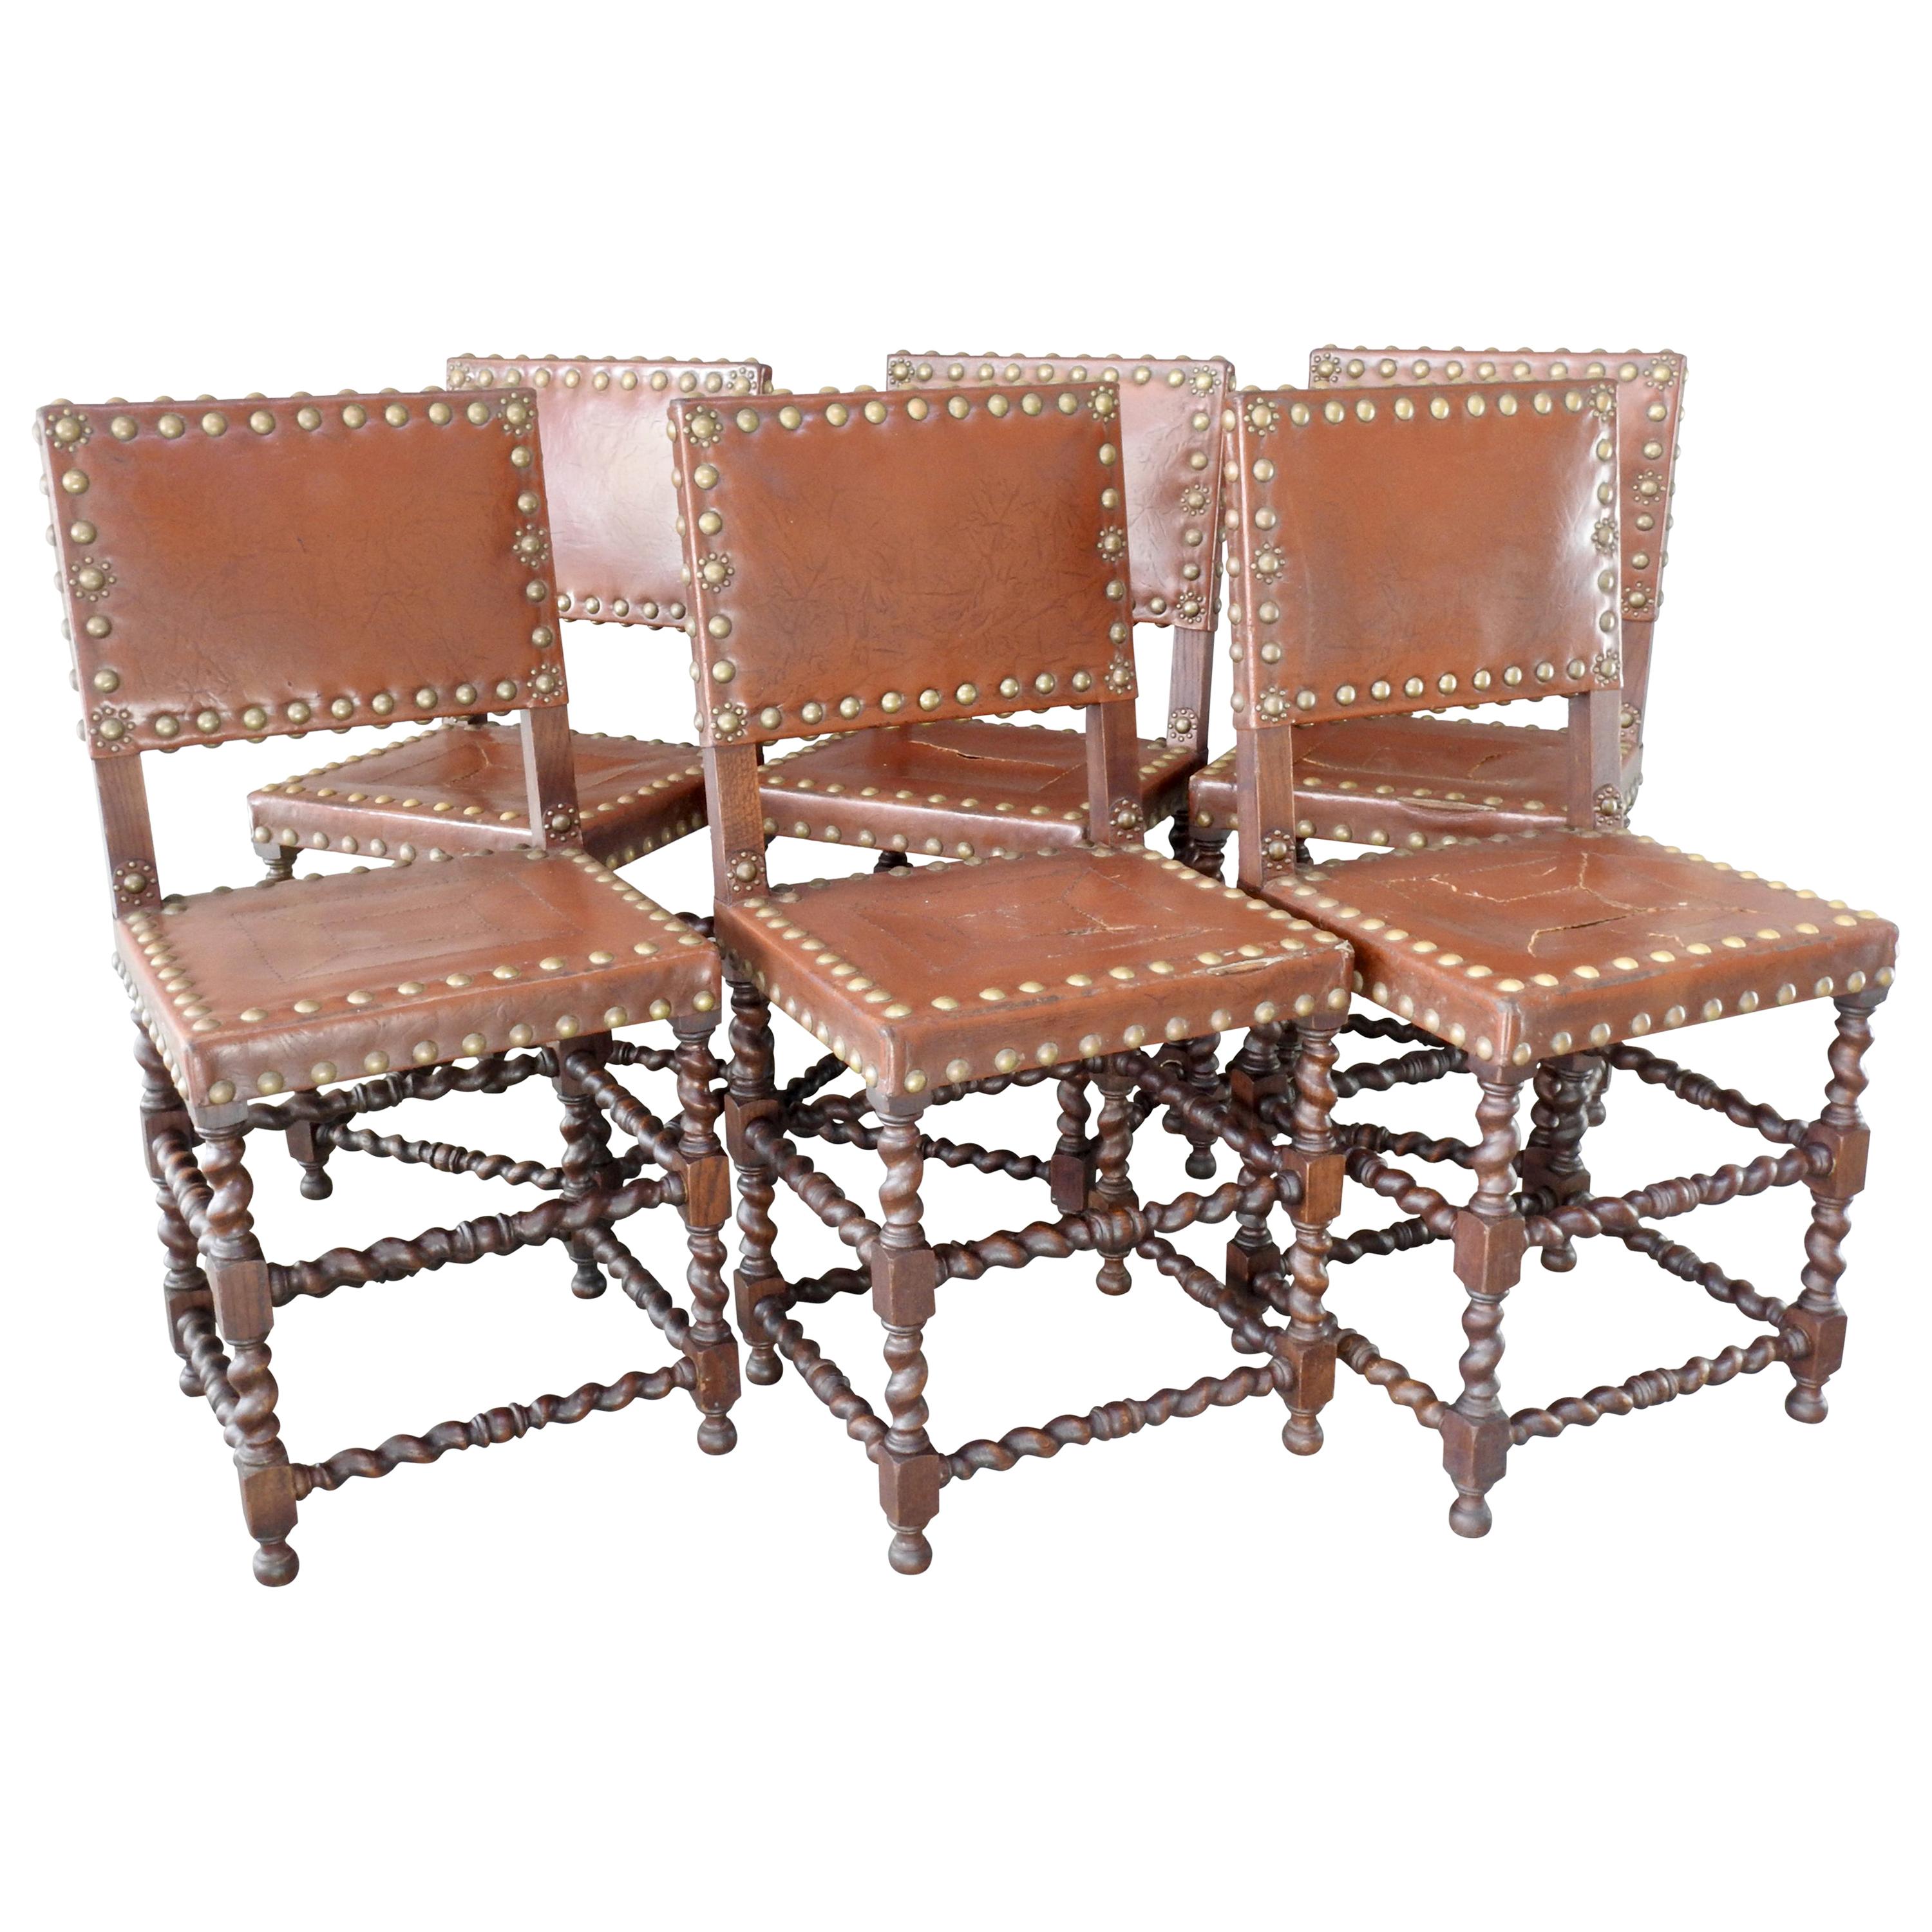 Set of Six English Barley Twist Chairs from the 19th Century For Sale